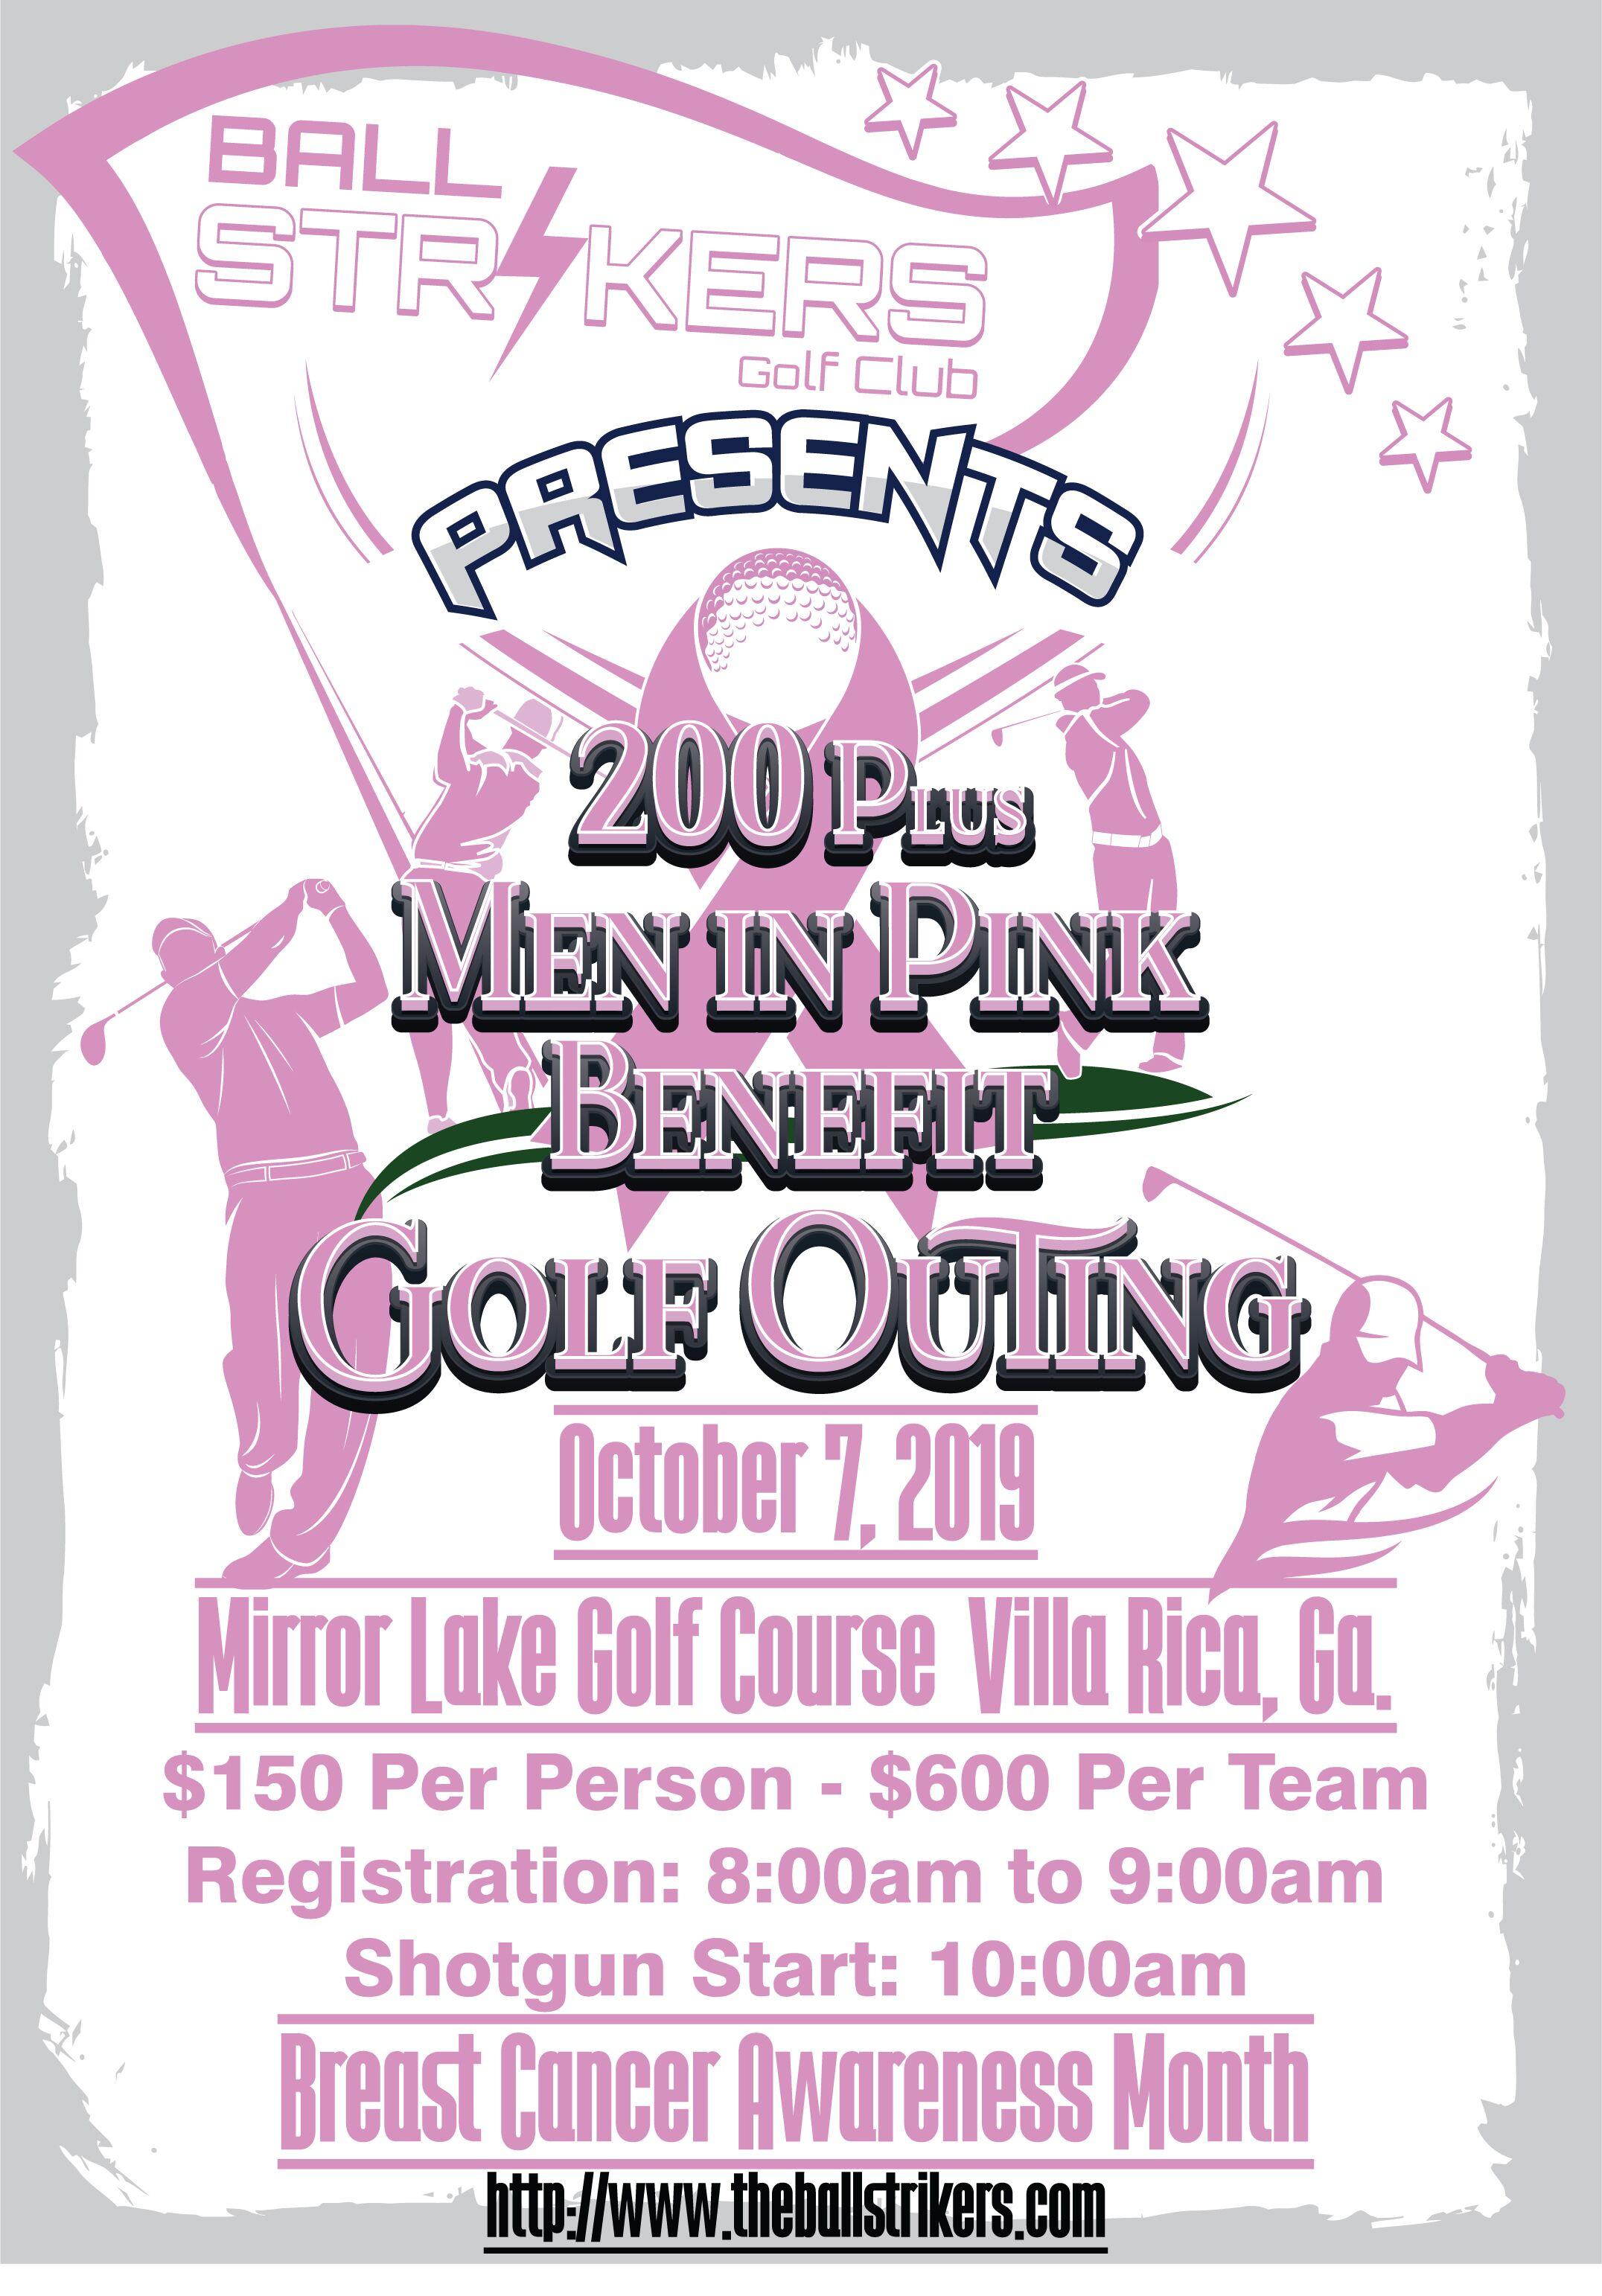 200+ Men in Pink Benefit Golf Outing